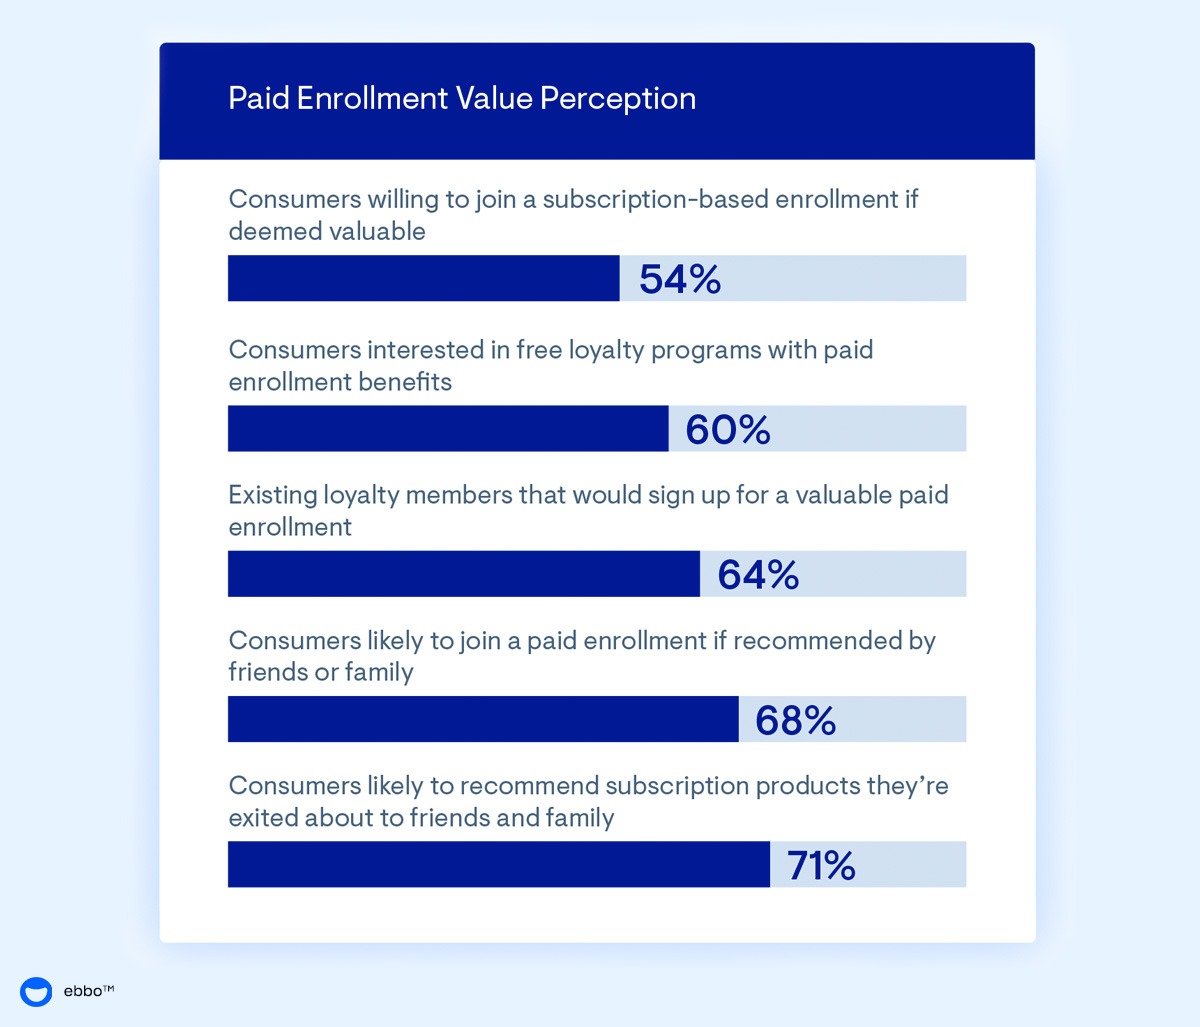 Chart showing consumers' perception of paid enrollment value